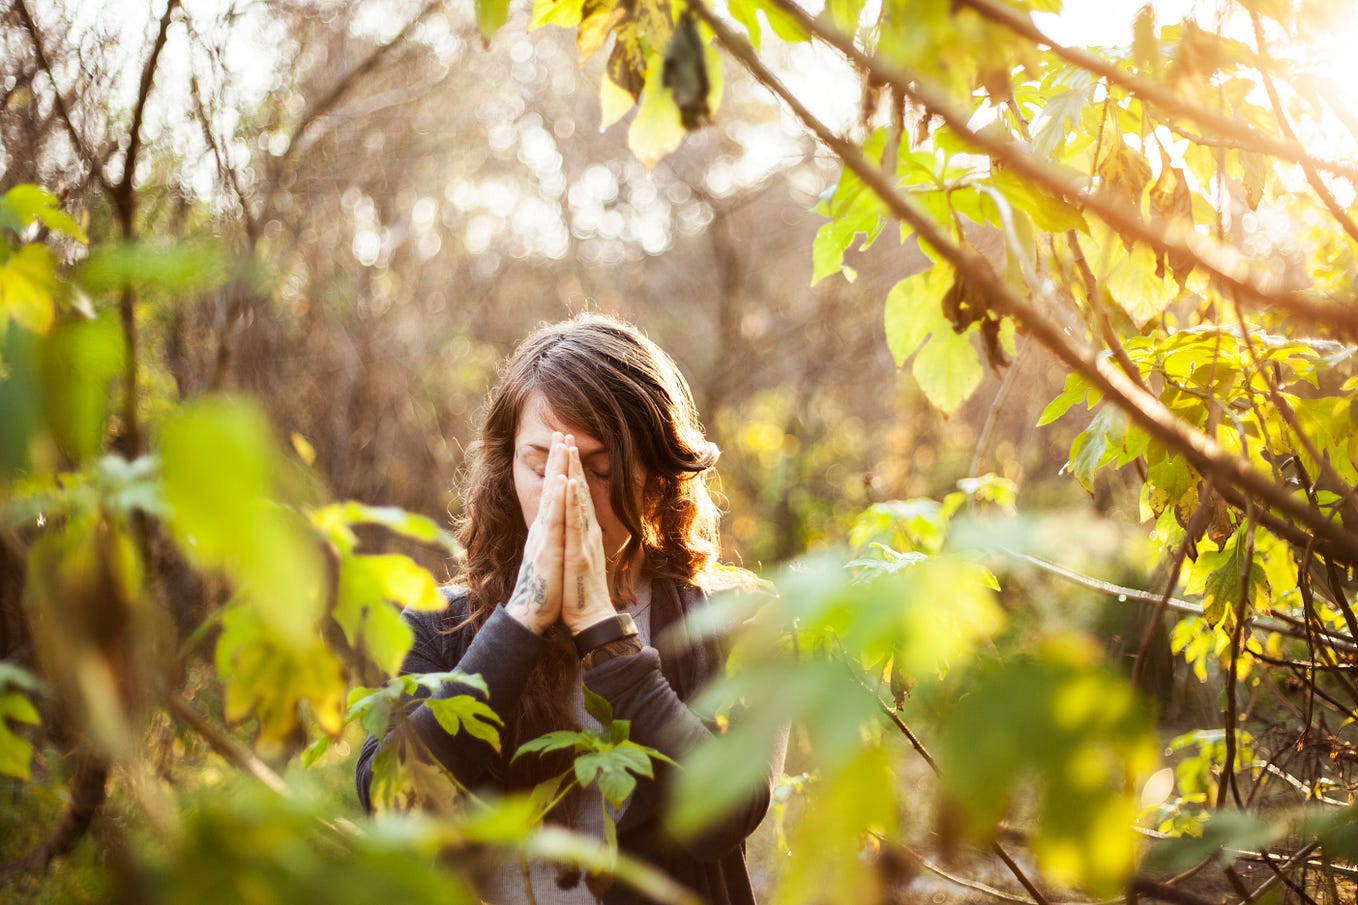 Woman in nature with her hands in prayer pose.